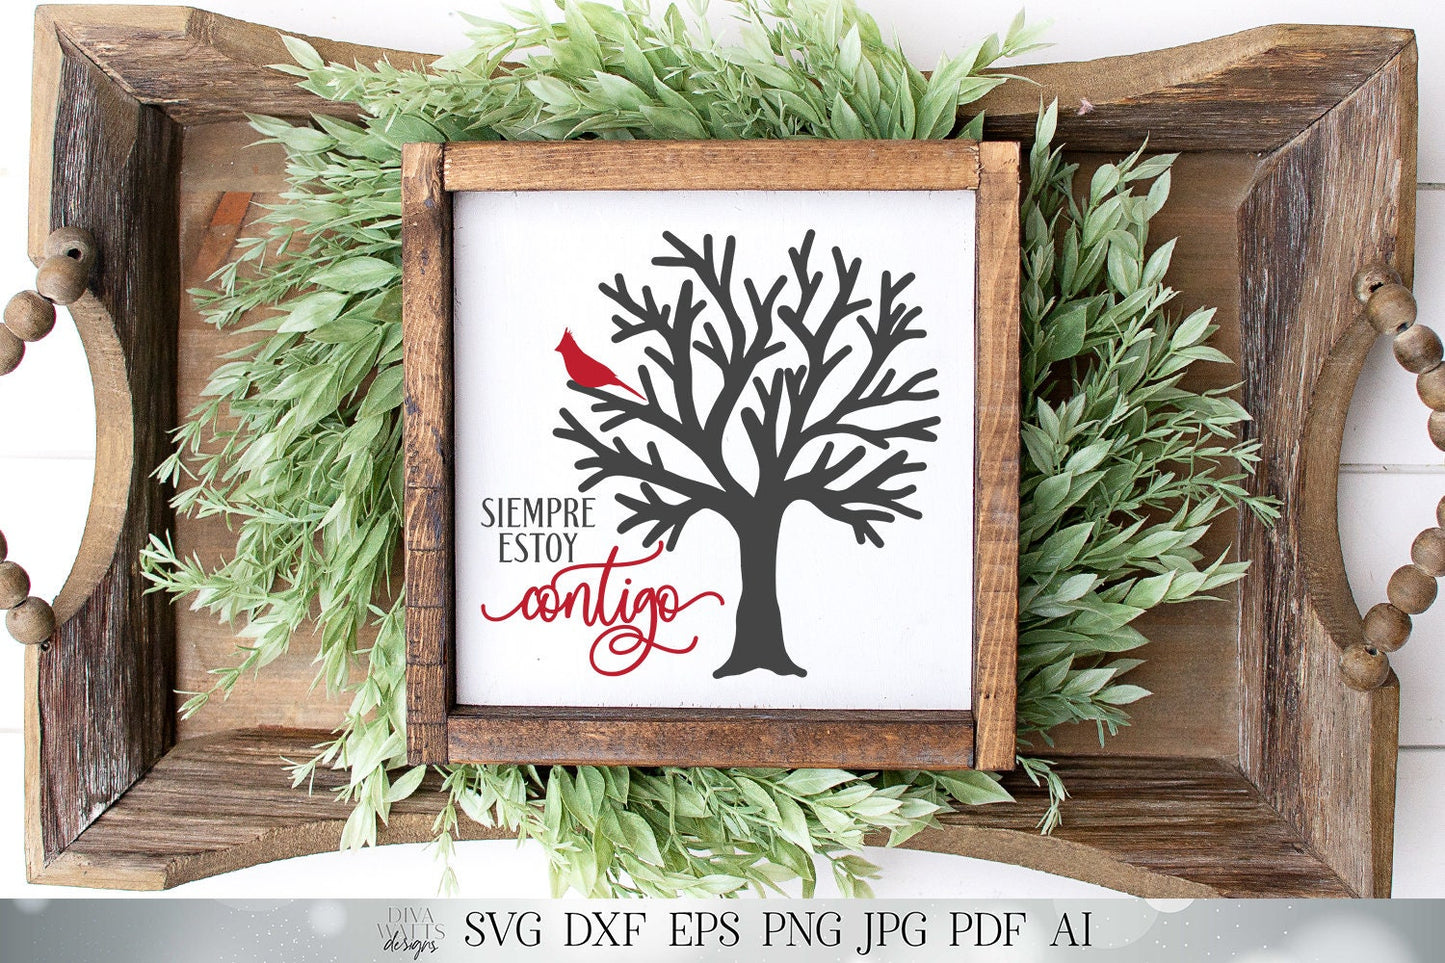 Siempre Estoy Contigo SVG | I Am Always With You SVG | Spanish SVG | Red Cardinal In Tree | dxf and more! | Printable